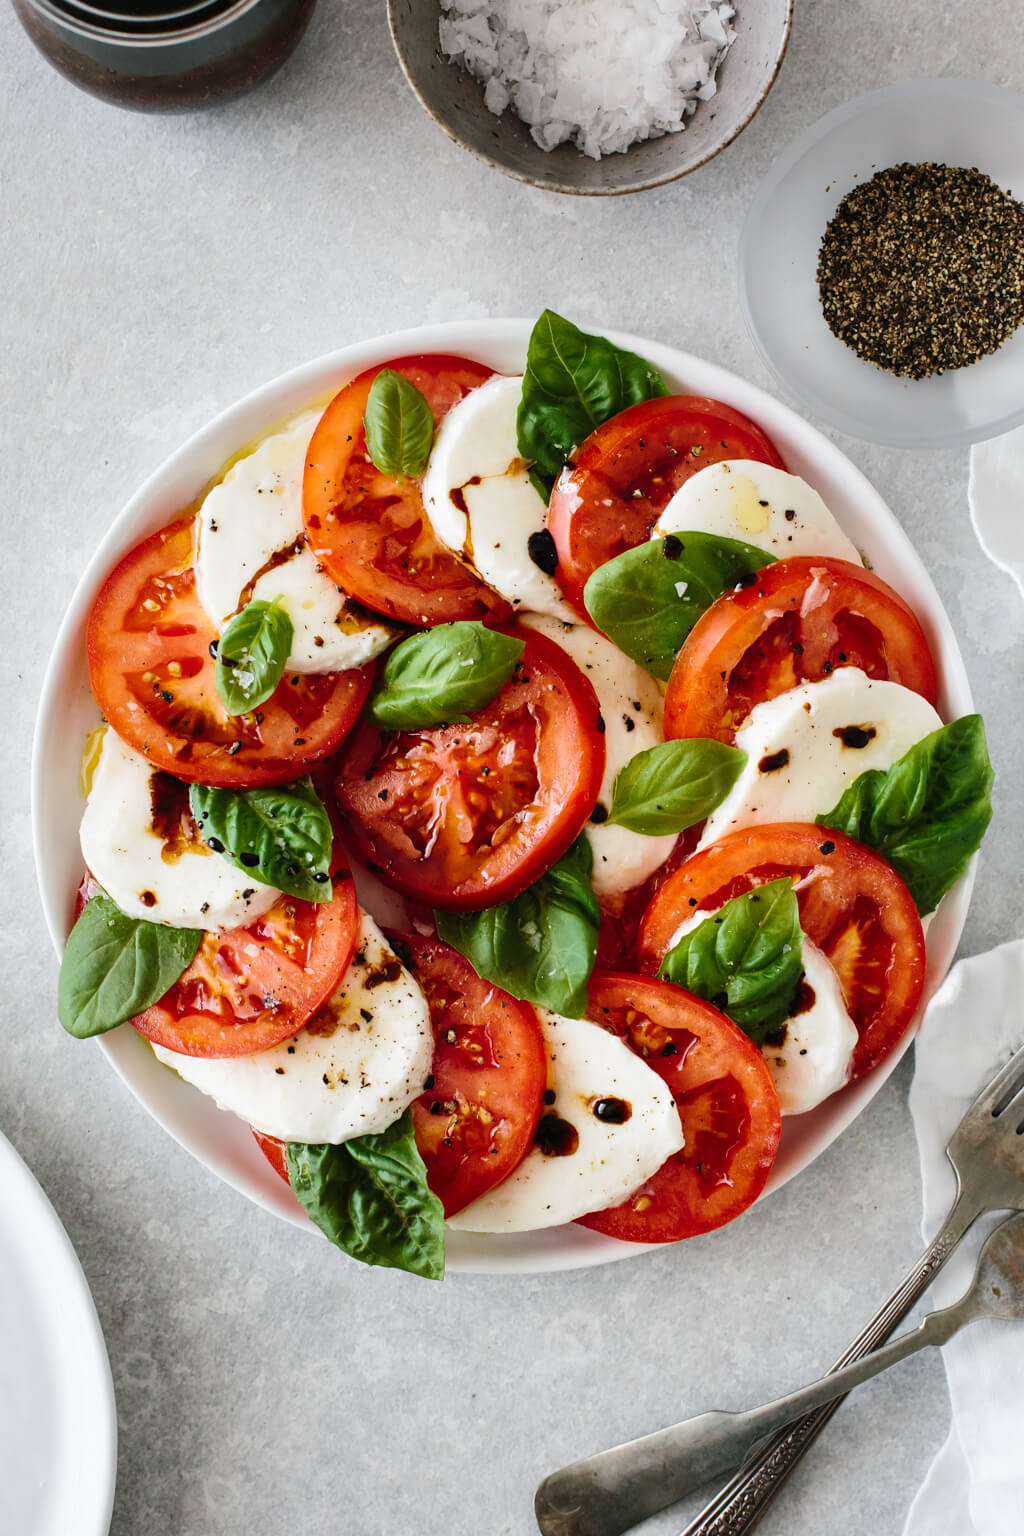 Slices of tomato and mozzarella on a plate with fresh basil leaves.